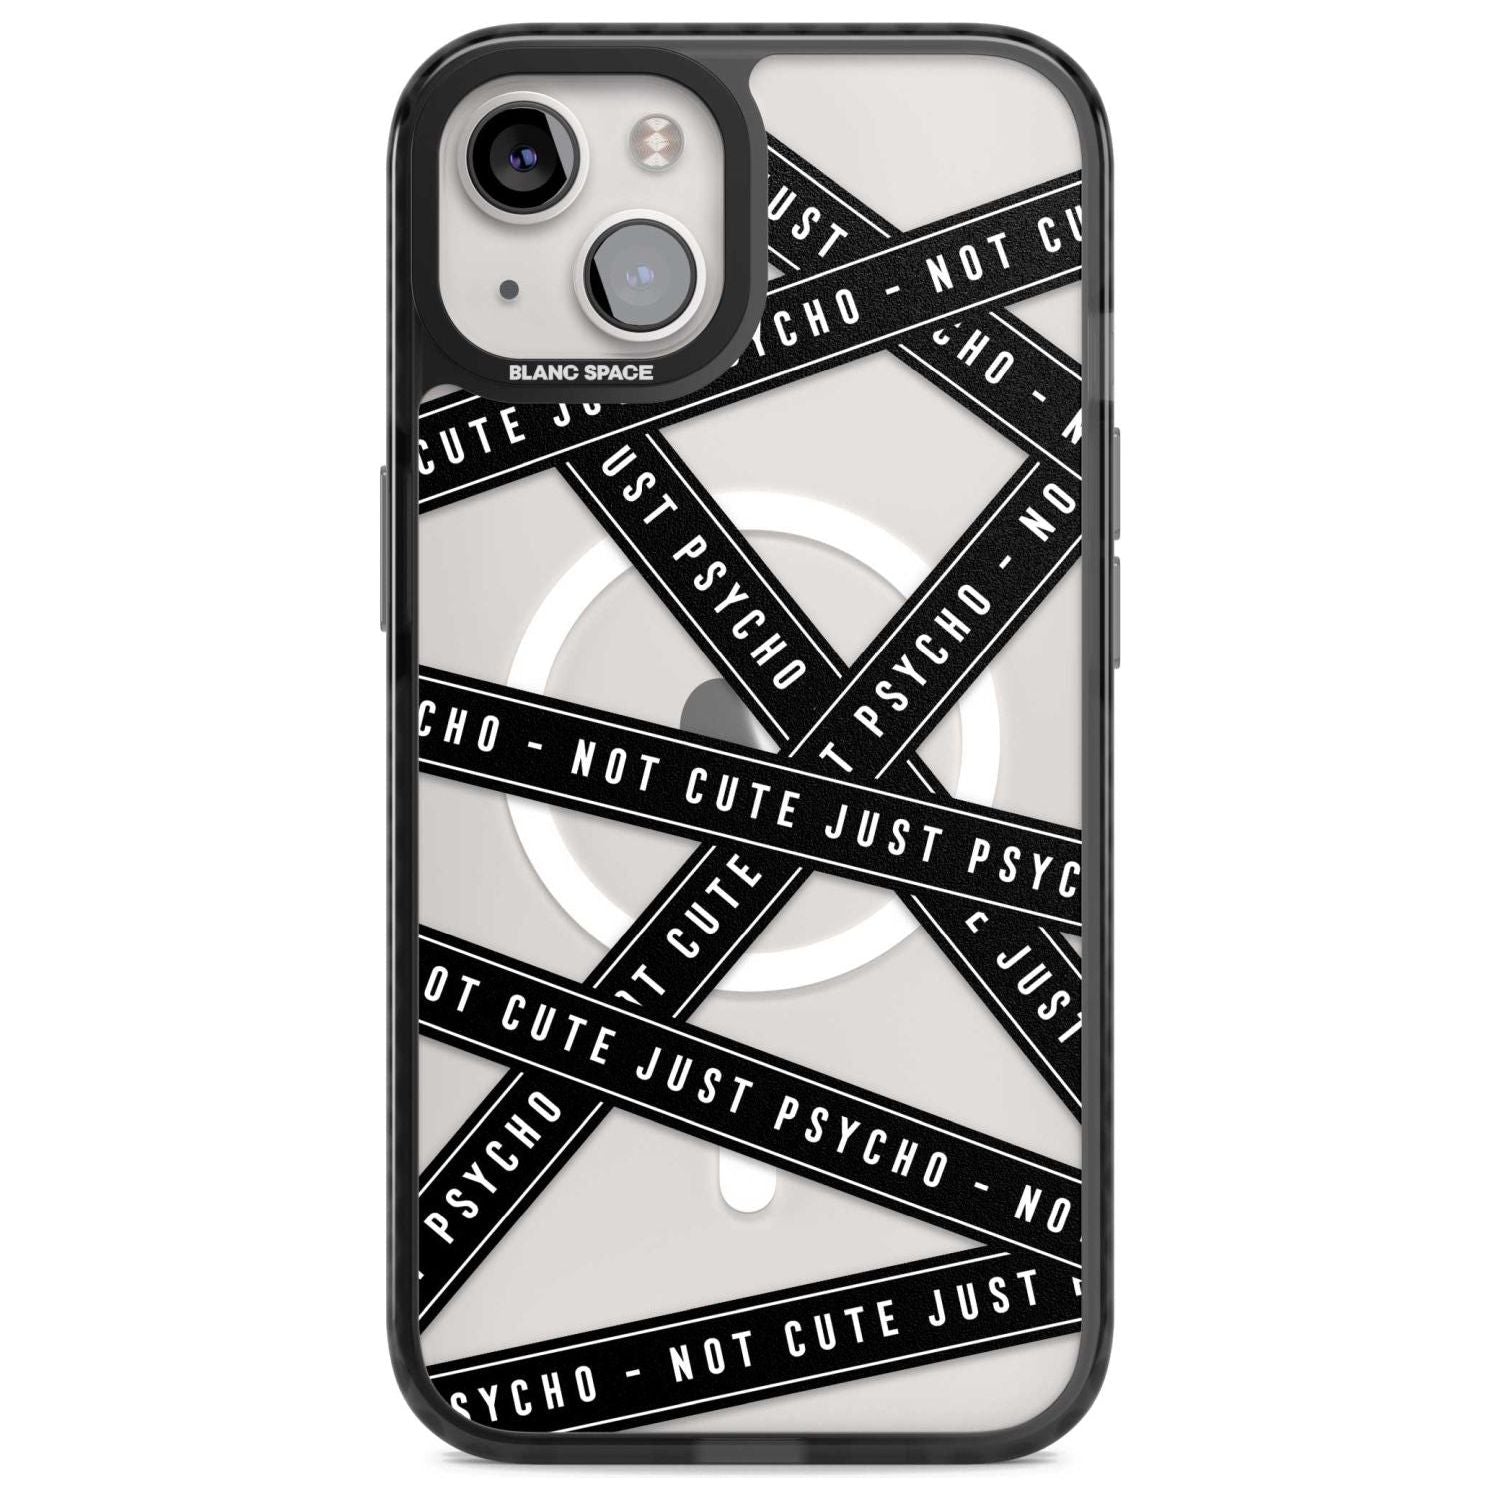 Caution Tape (Clear) Not Cute Just Psycho Phone Case iPhone 15 Plus / Magsafe Black Impact Case,iPhone 15 / Magsafe Black Impact Case,iPhone 14 Plus / Magsafe Black Impact Case,iPhone 14 / Magsafe Black Impact Case,iPhone 13 / Magsafe Black Impact Case Blanc Space